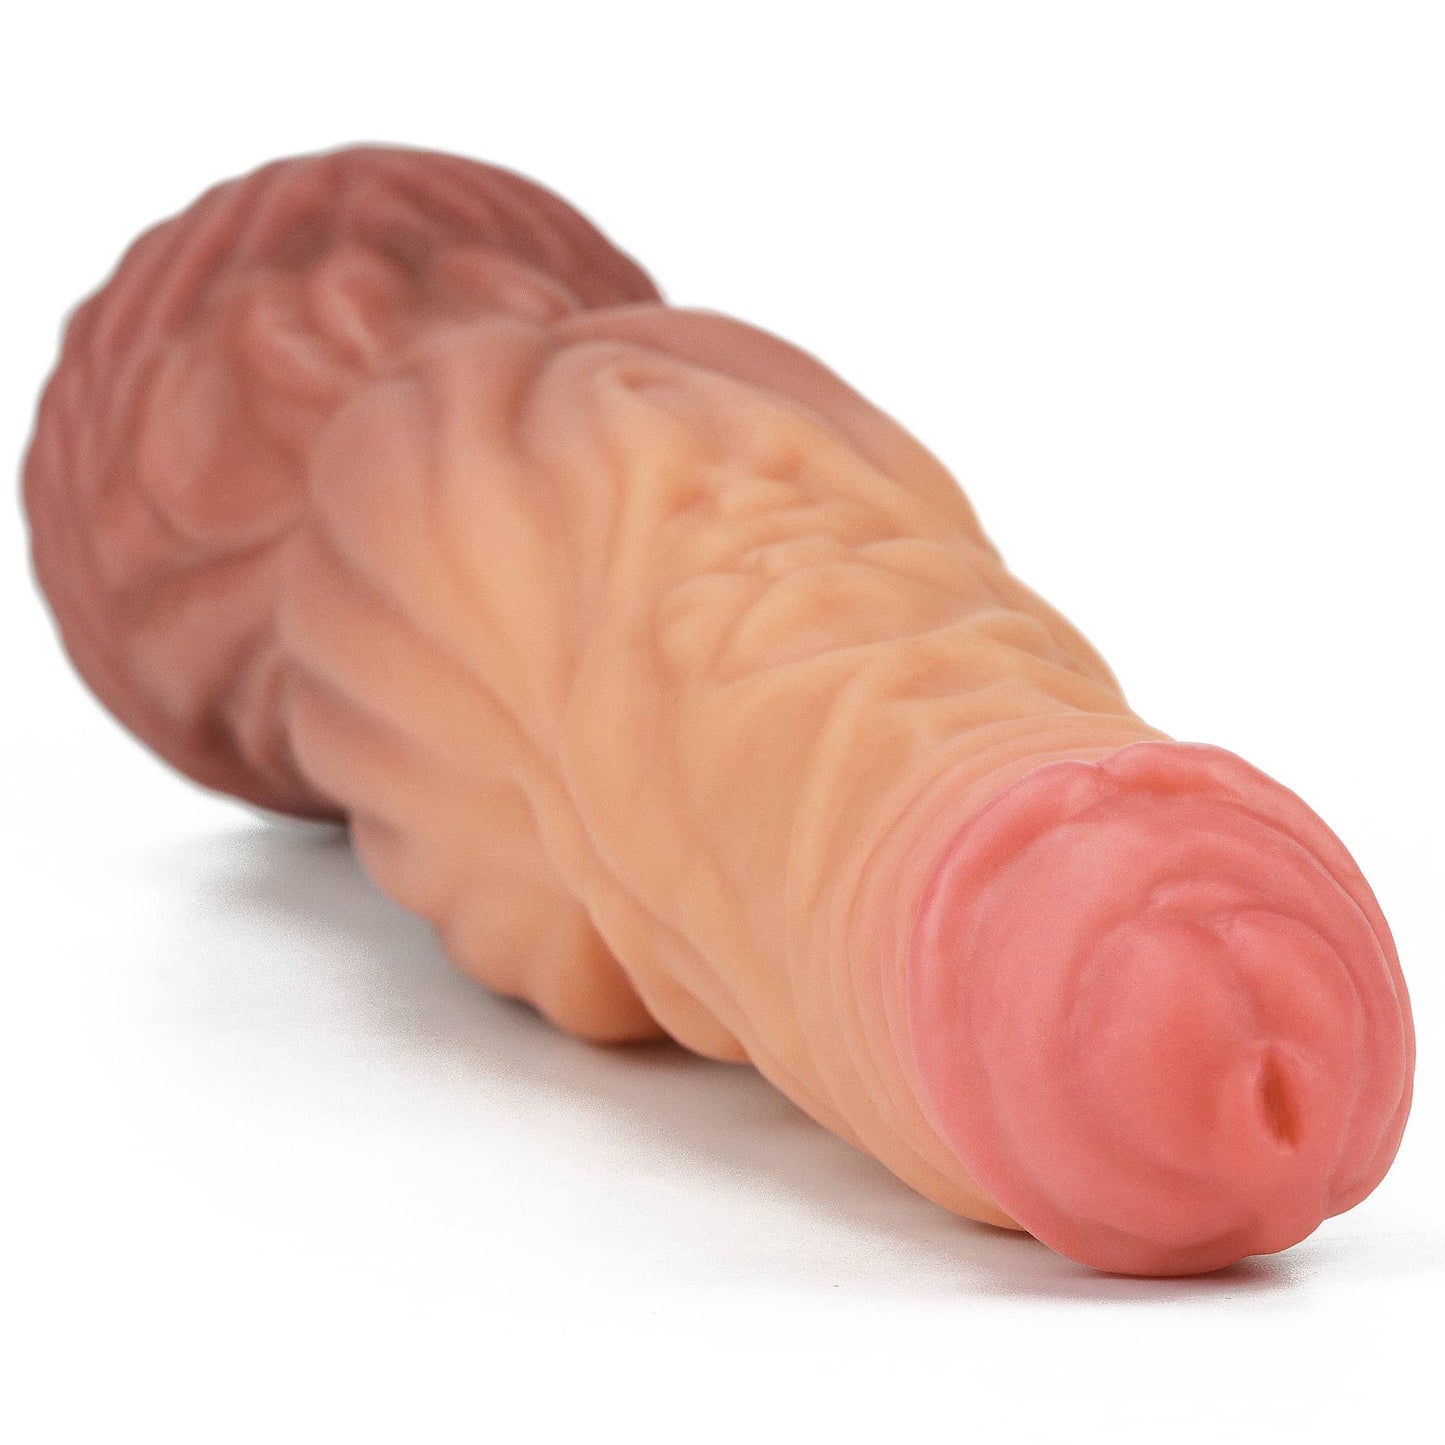 The 9.5 inches silicone realistic wolf dildo lies flat and shows its textured head